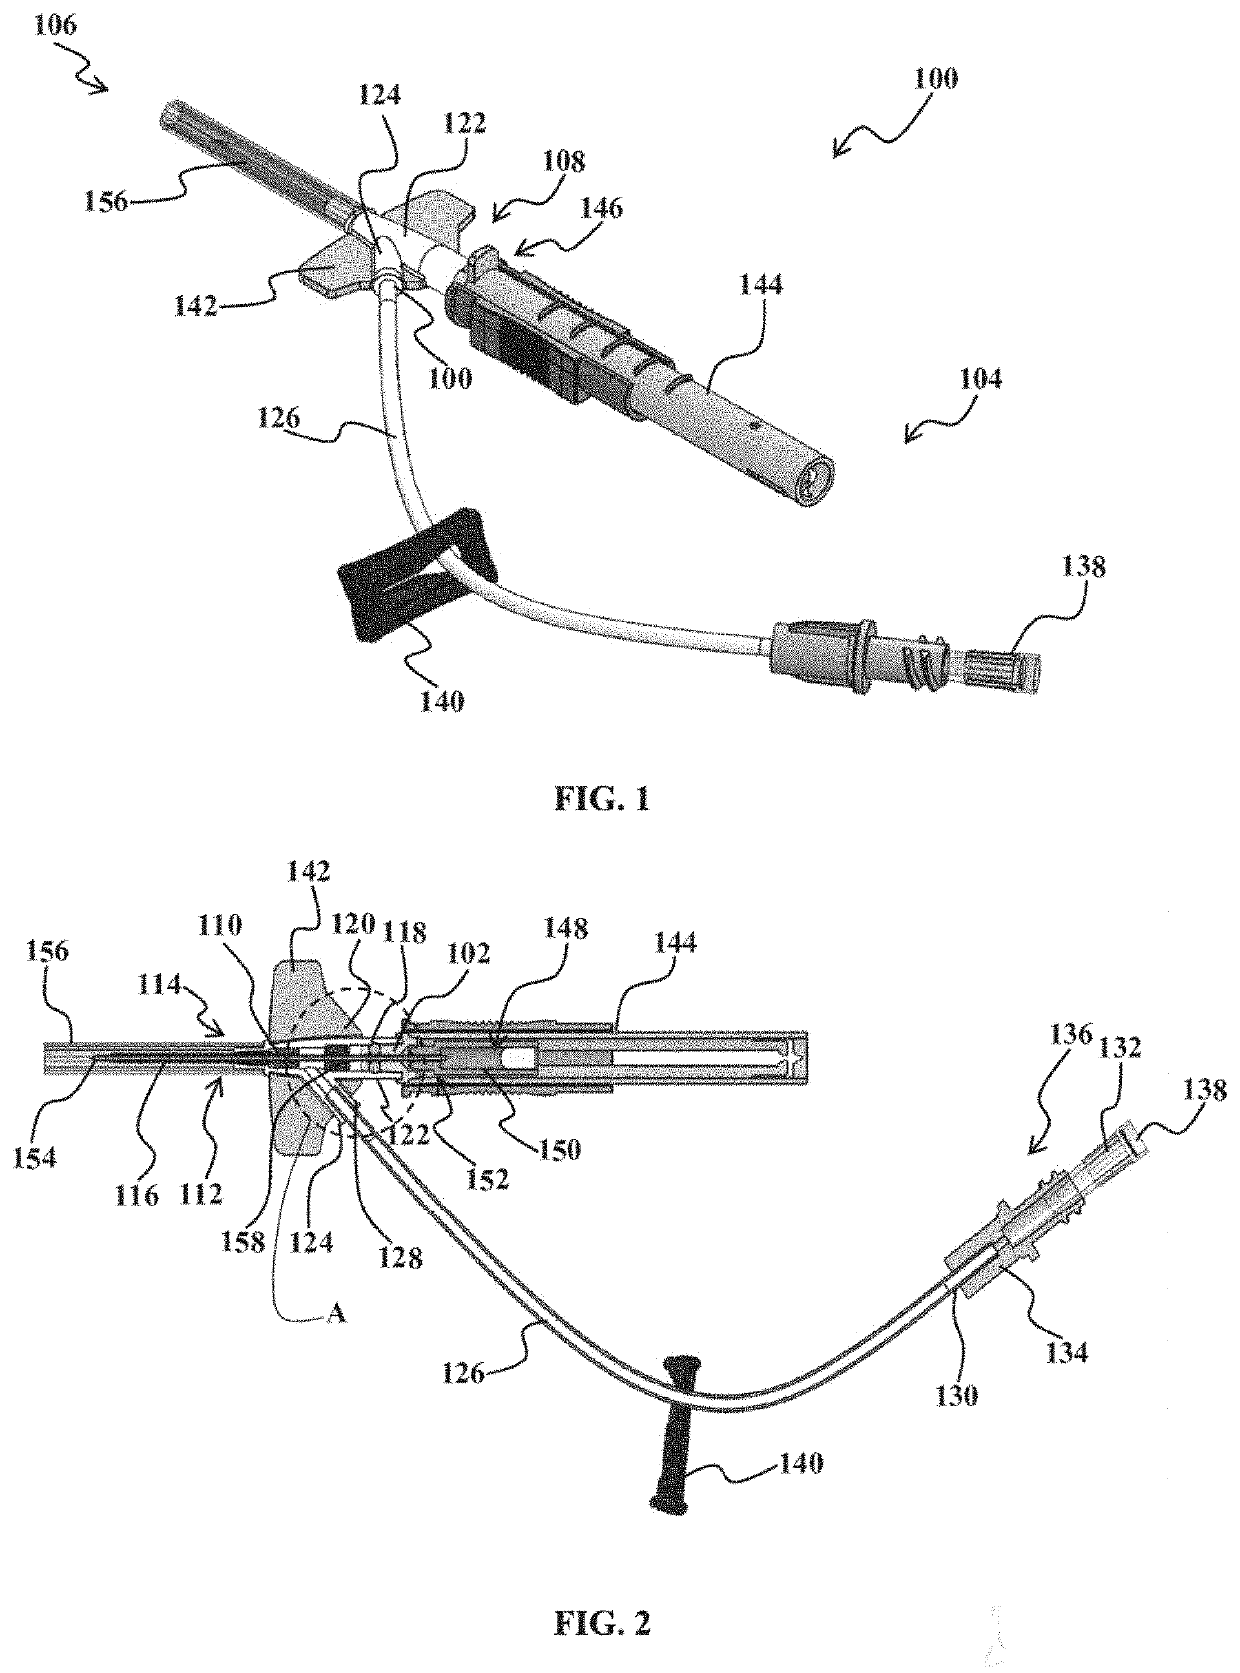 Safety intravenous cannula